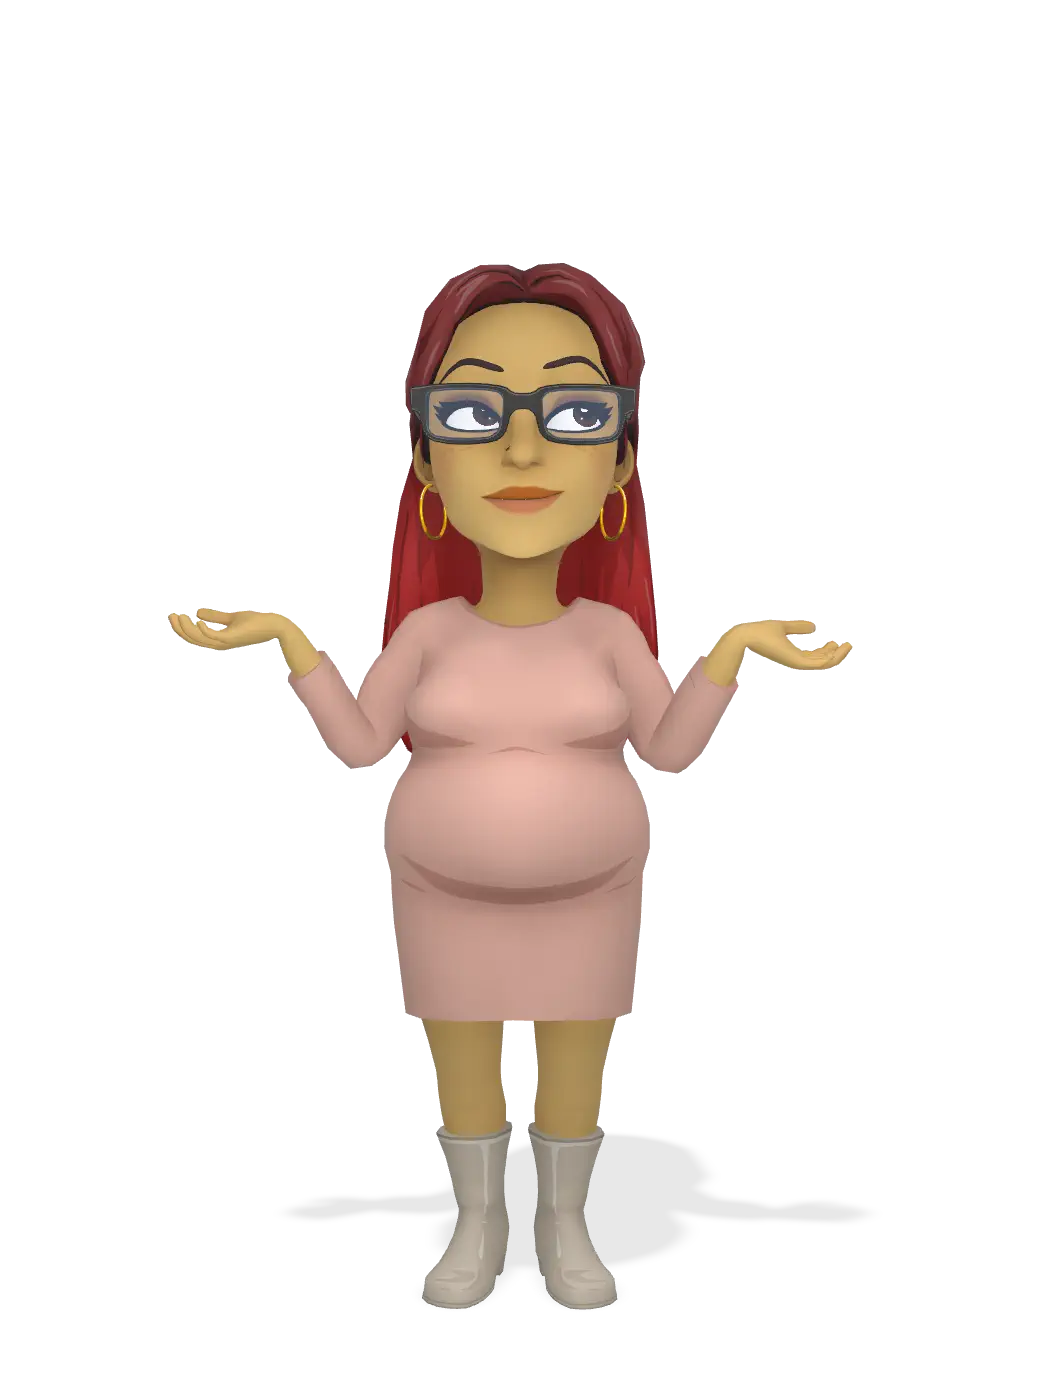 3D Bitmoji for royally_yours